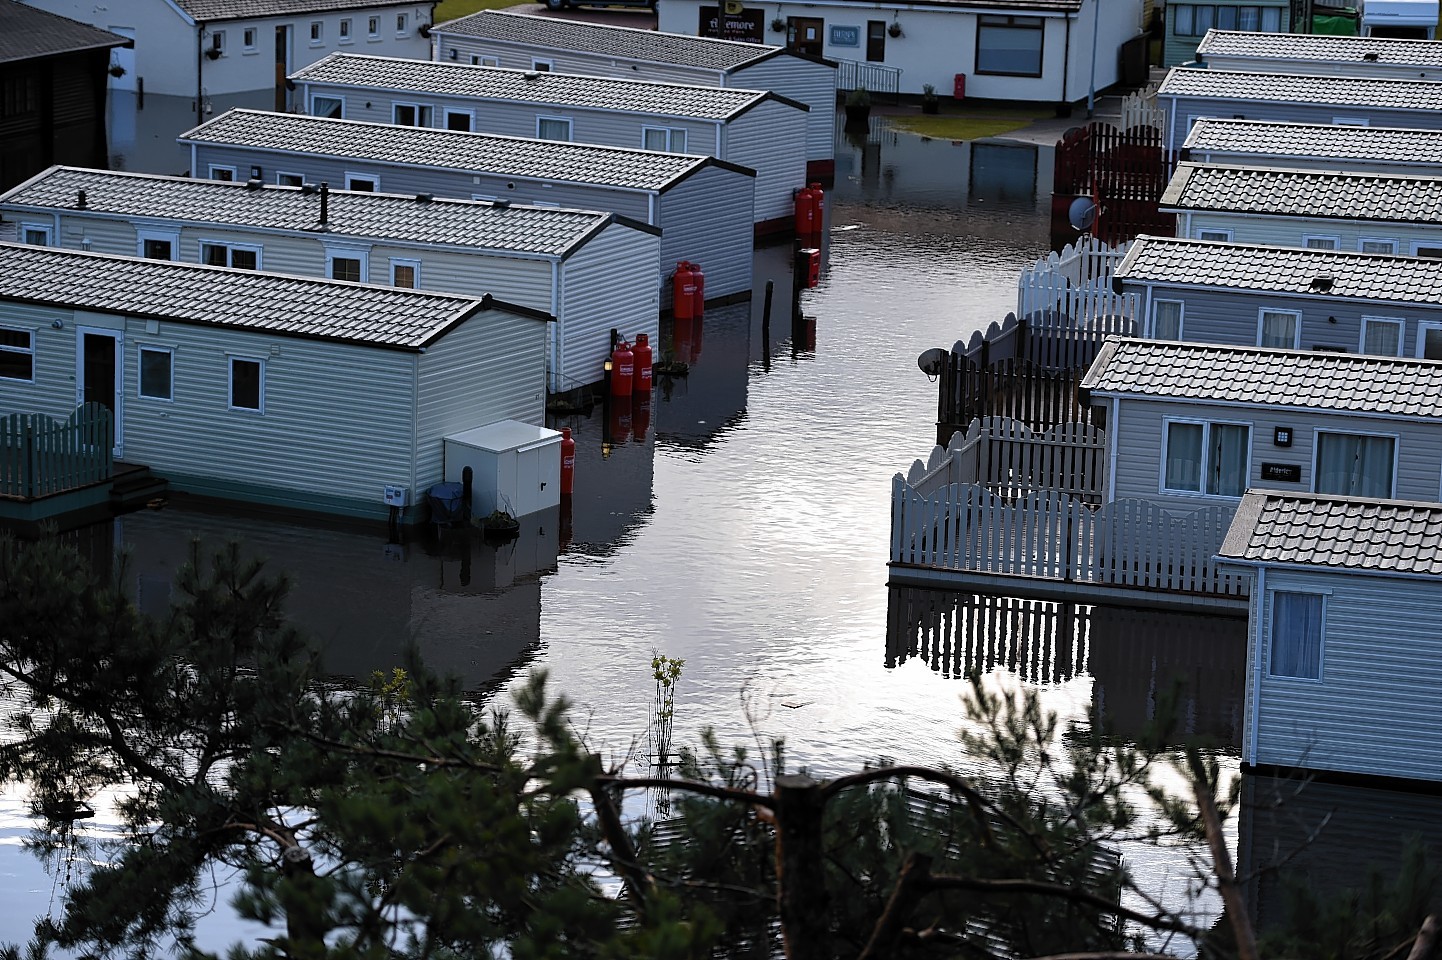 Flooding at the caravan site in Aviemore.Picture by Gordon Lennox 06/12/2015